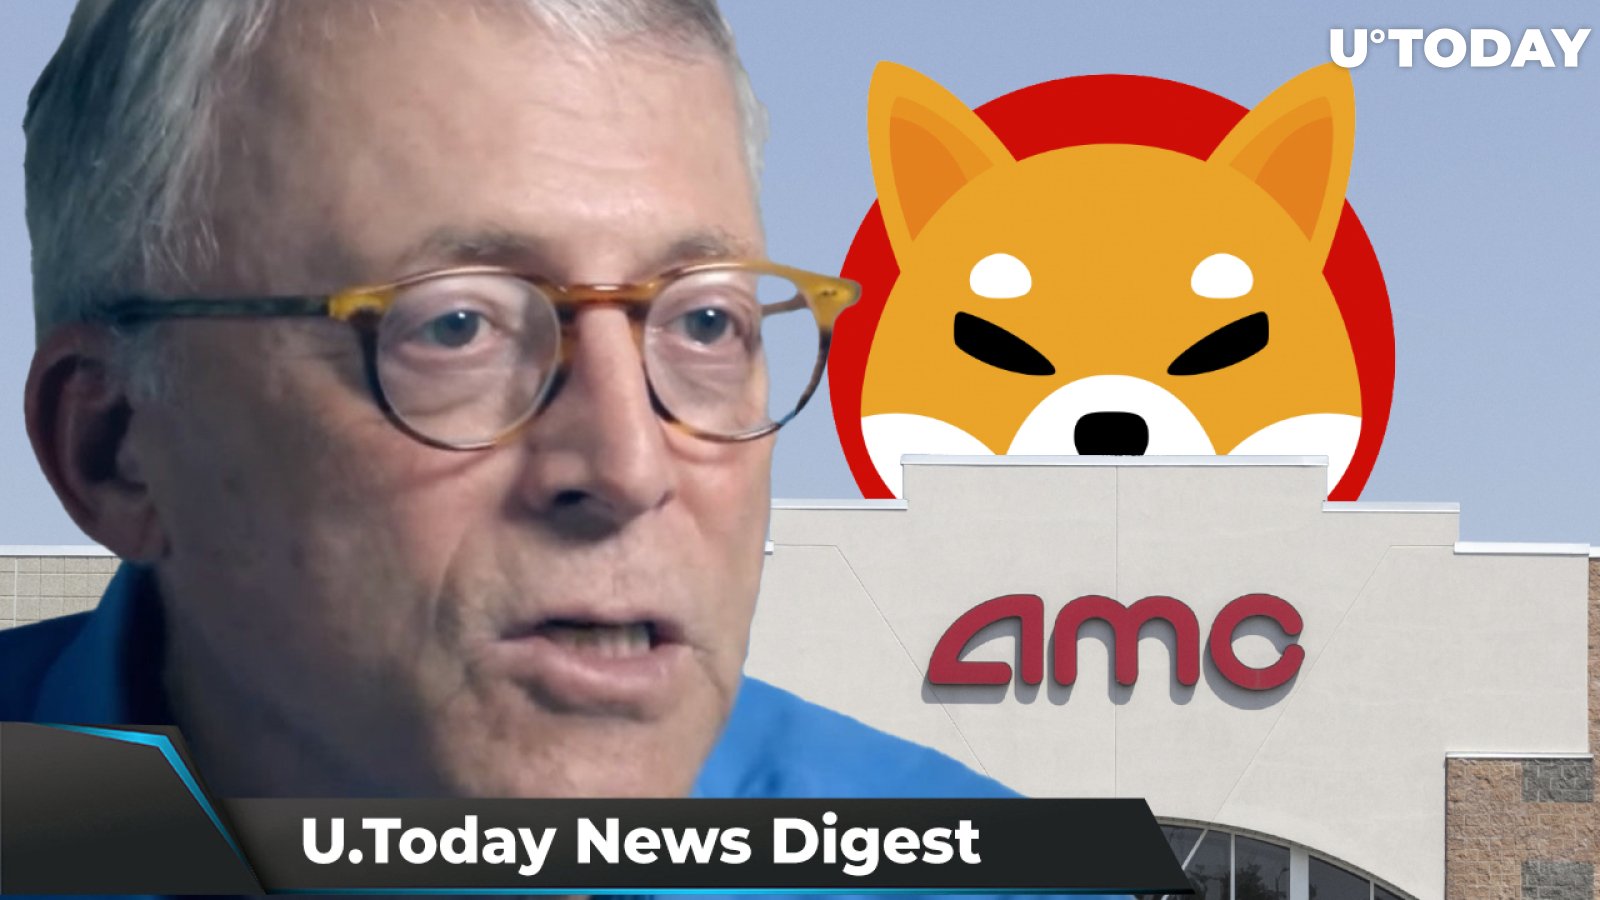 Shiba Inu Now Supported by ZenGo, Peter Brandt Quits Crypto Twitter, AMC to Start Accepting SHIB in Four Months: Crypto News Digest by U.Today